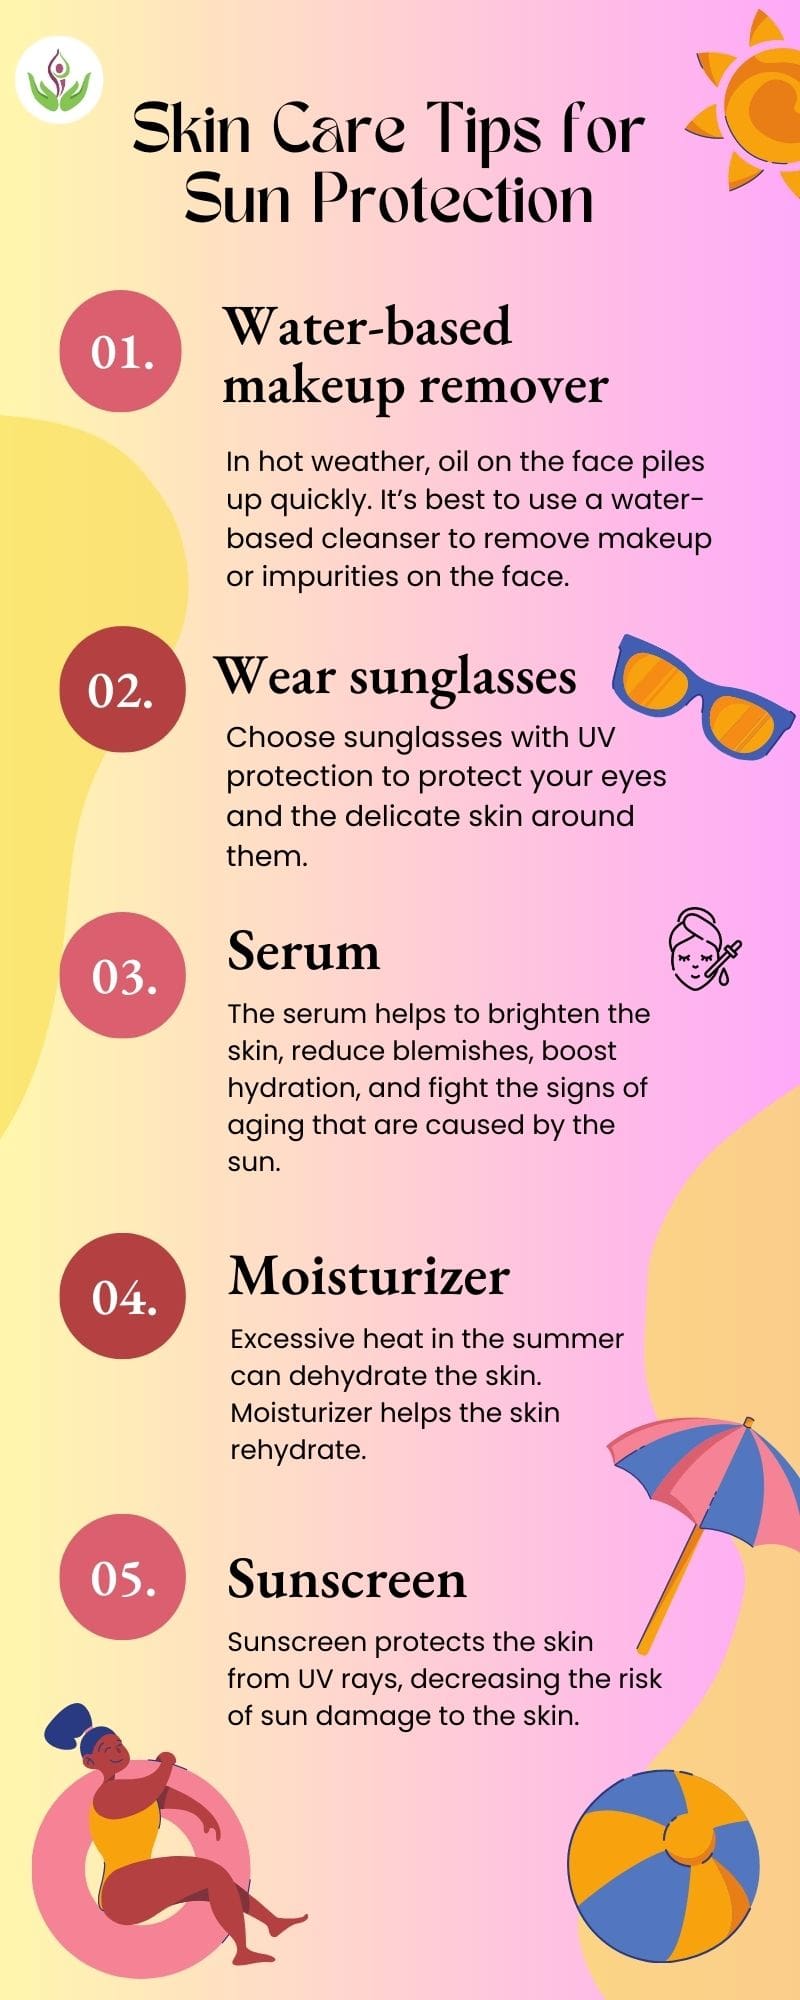 Skin Care Tips for Sun Protection